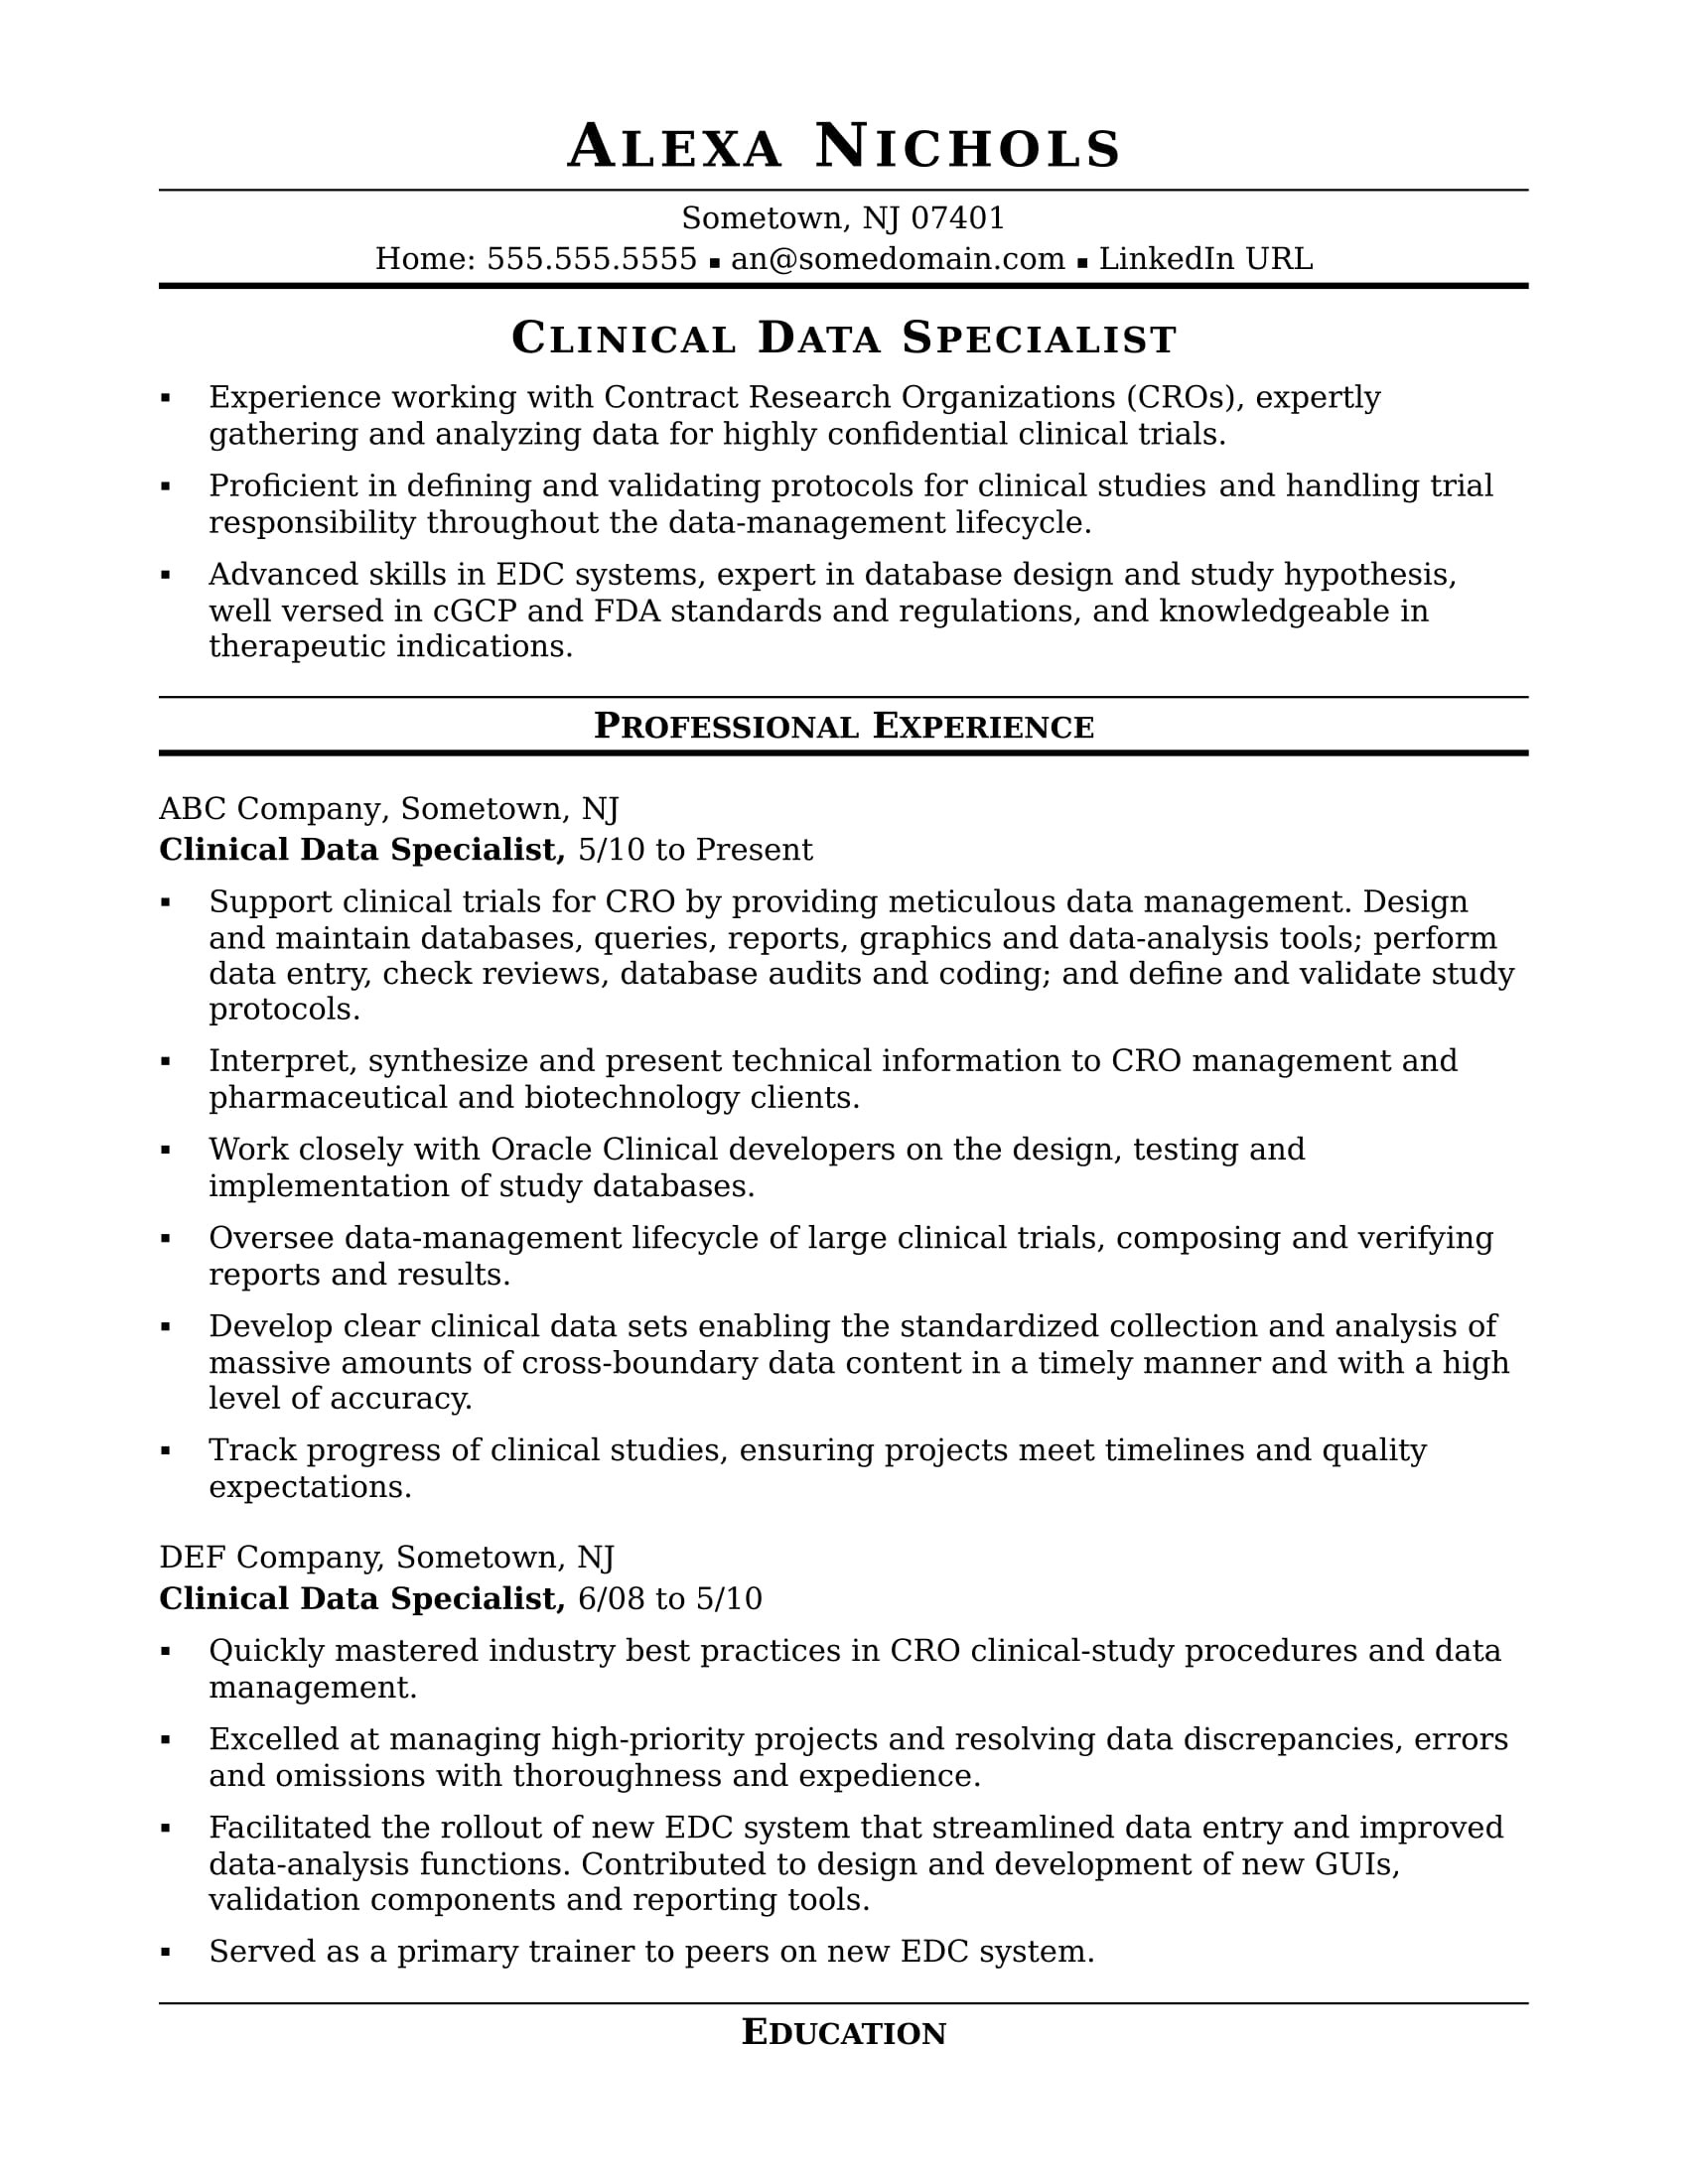 Sample Resume Sas Clinical Analyst Freshers Clinical Data Specialist Resume Sample Monster.com